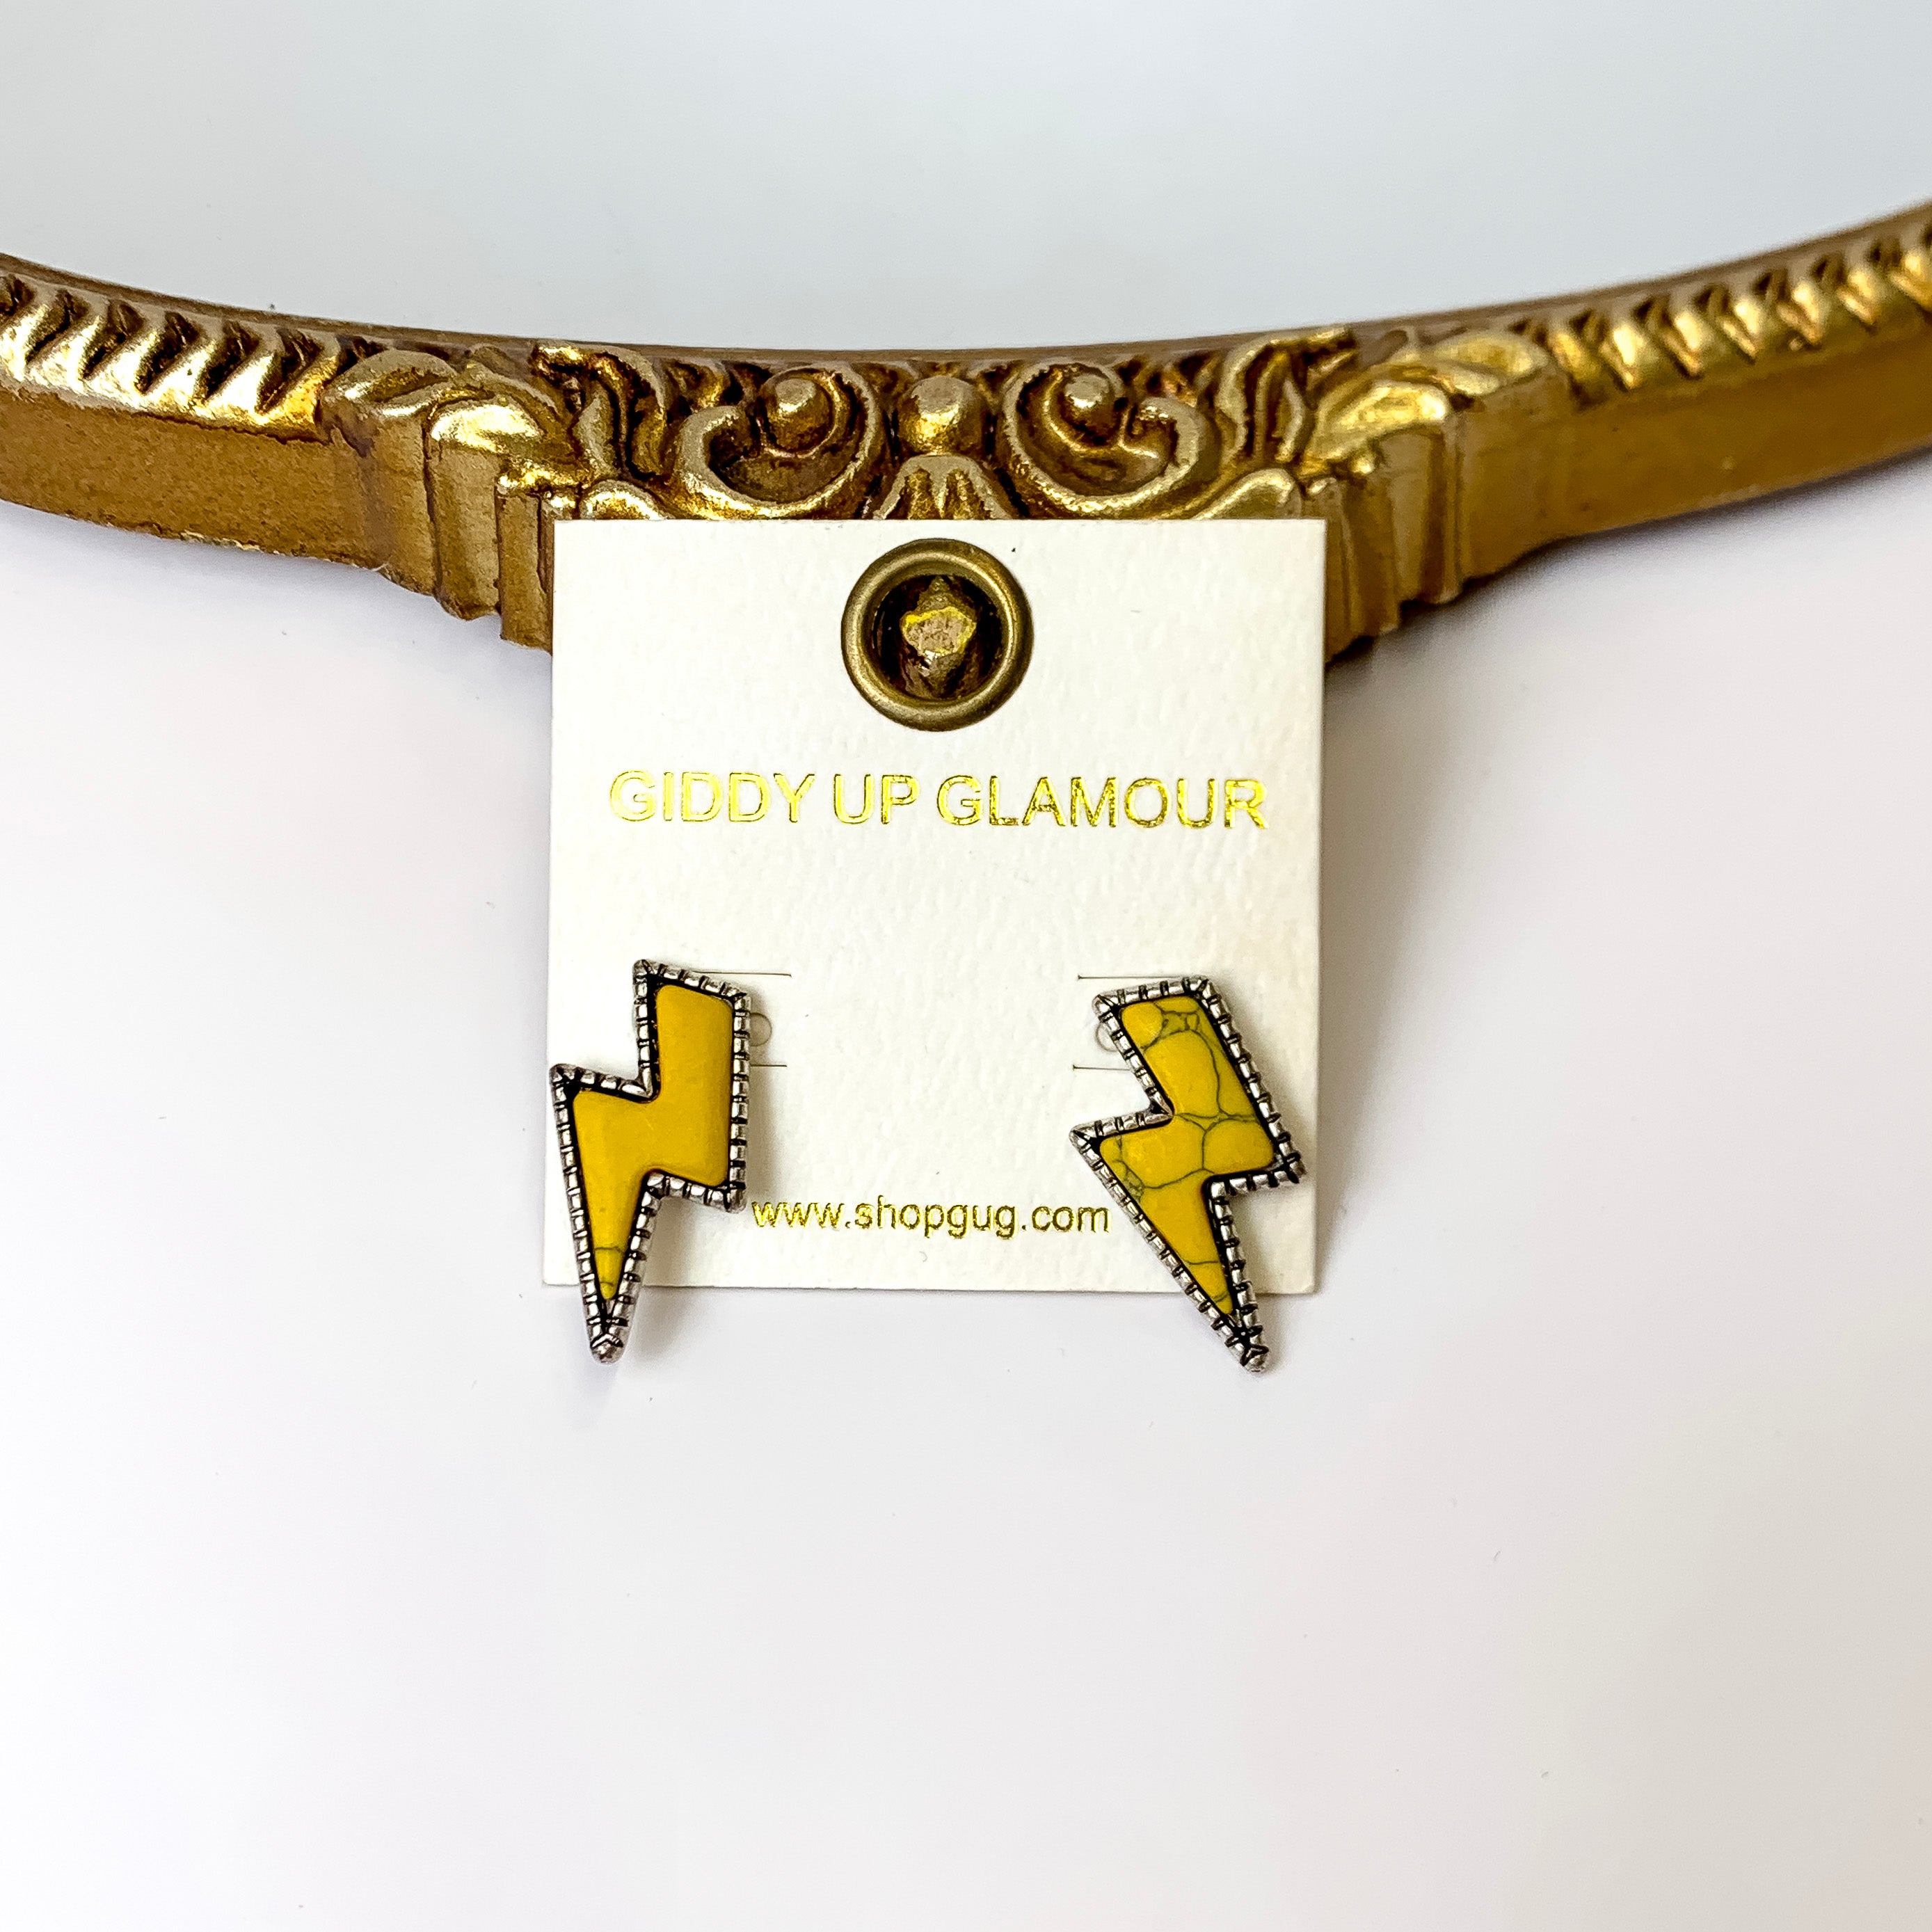 Lightning Bolt Stone Stud Earrings in Yellow - Giddy Up Glamour Boutique